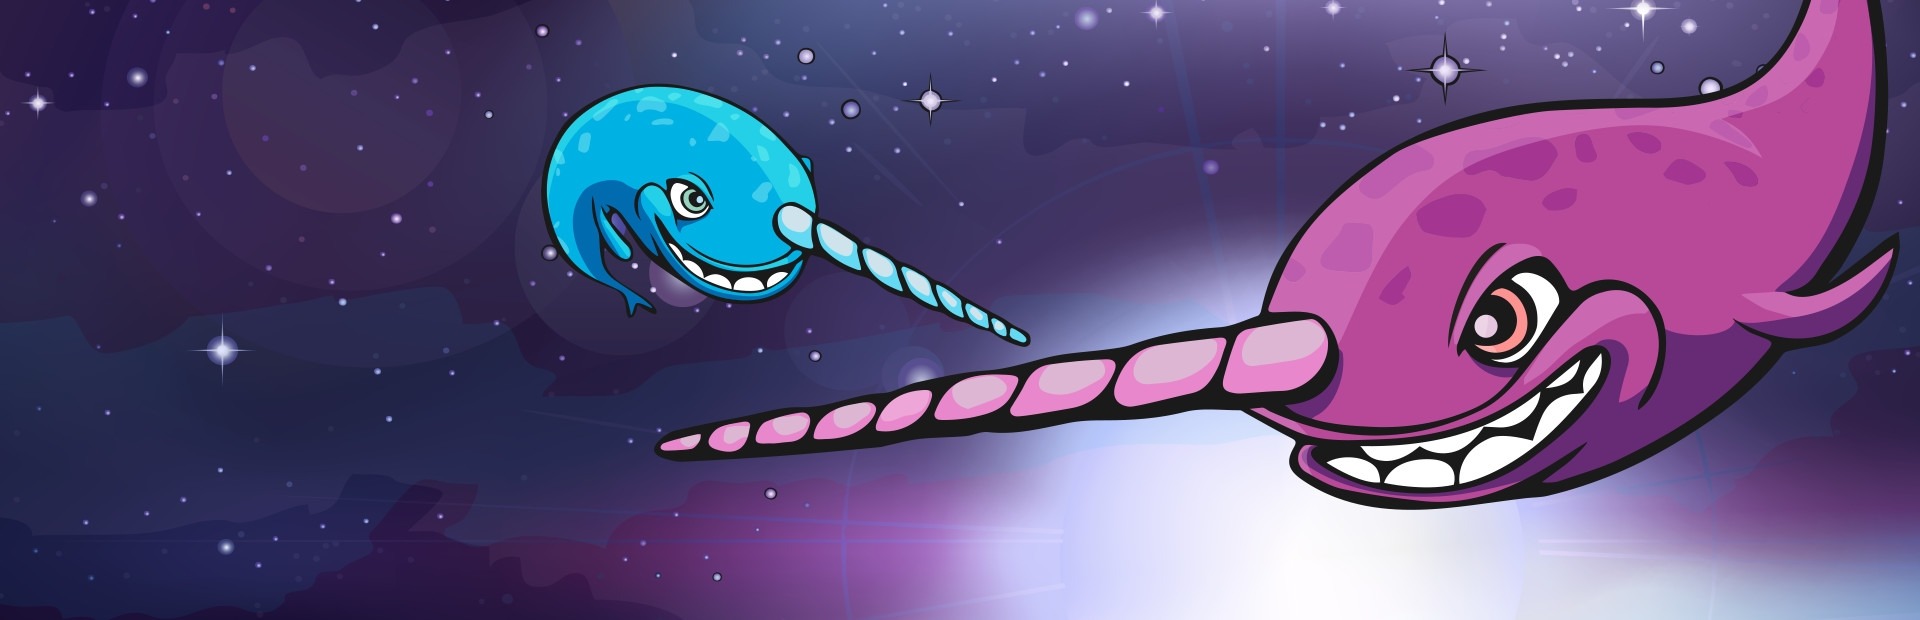 Banner Starwhal